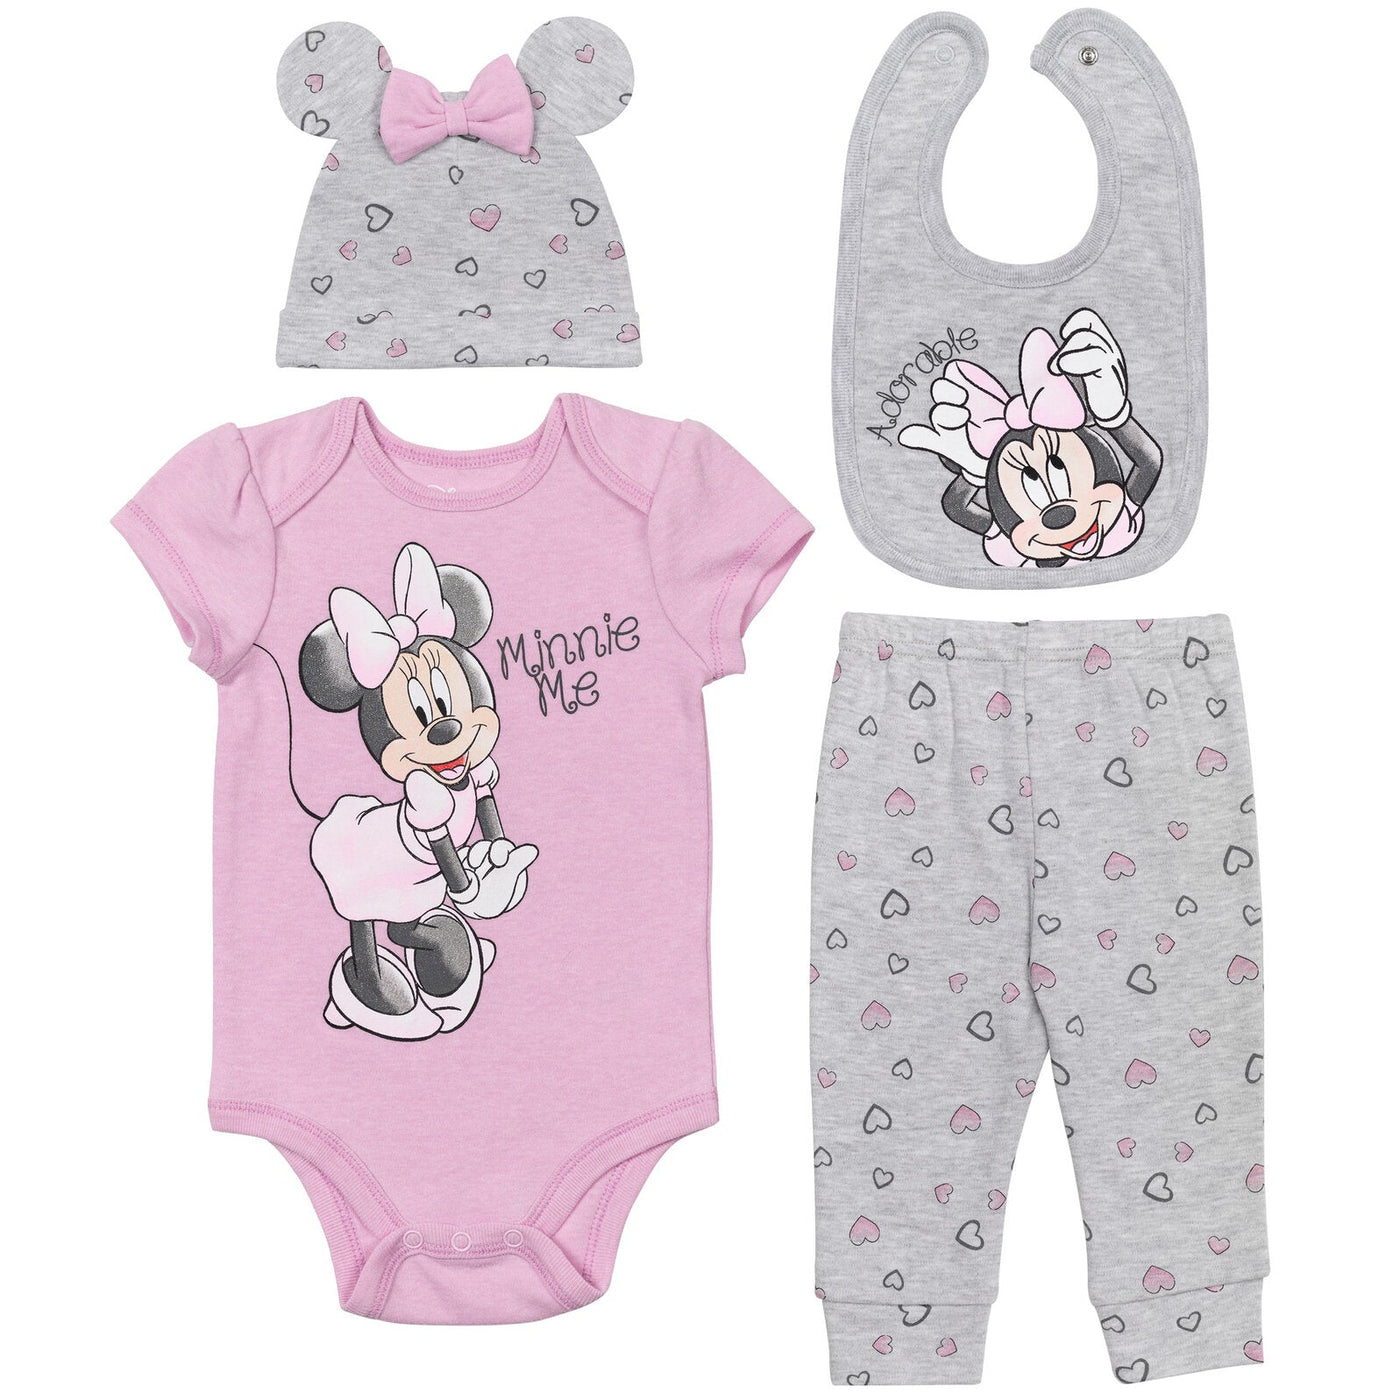 Disney Minnie Mouse Cosplay Bodysuit Pants Bib and Hat 4 Piece Outfit Set - imagikids